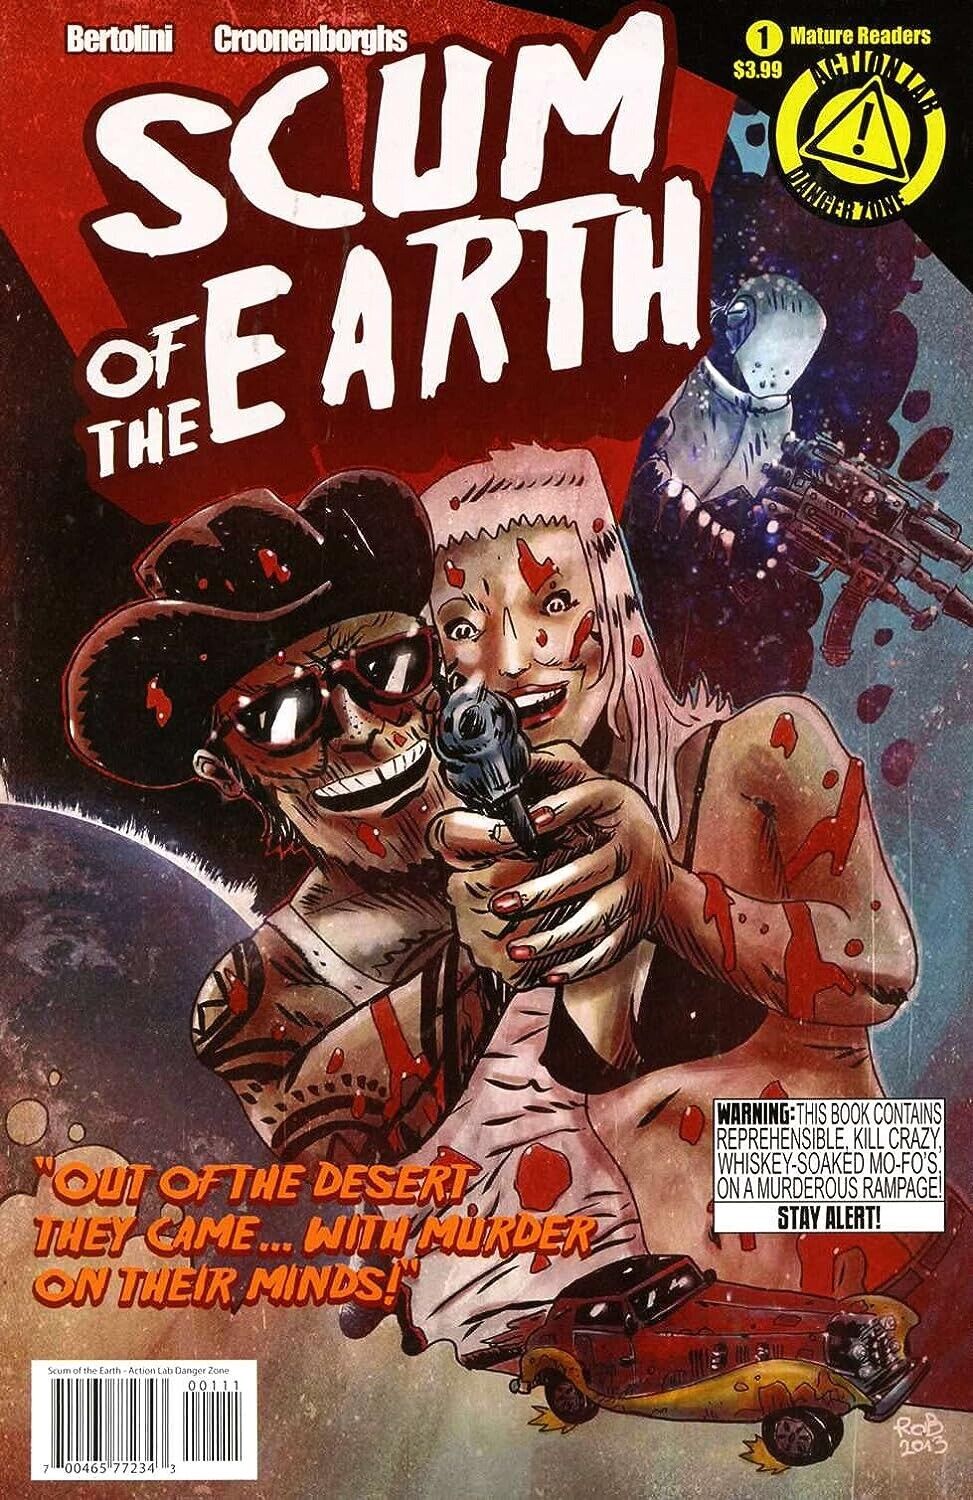 ACTION LAB ‘Scum of the Earth” #1 thru 3 Complete